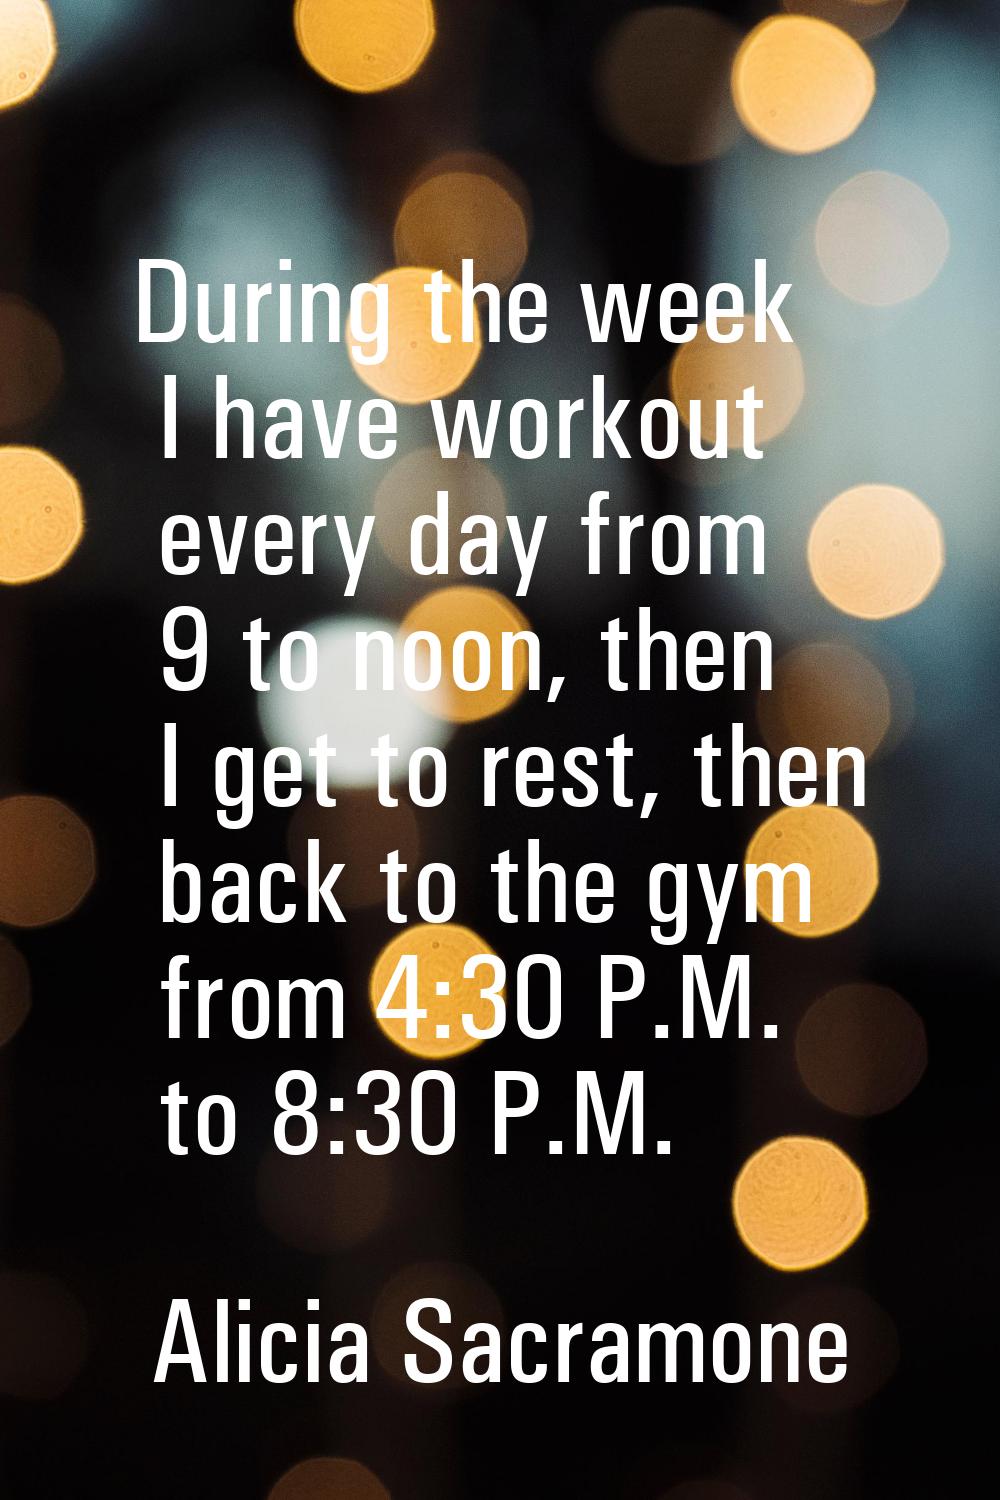 During the week I have workout every day from 9 to noon, then I get to rest, then back to the gym f